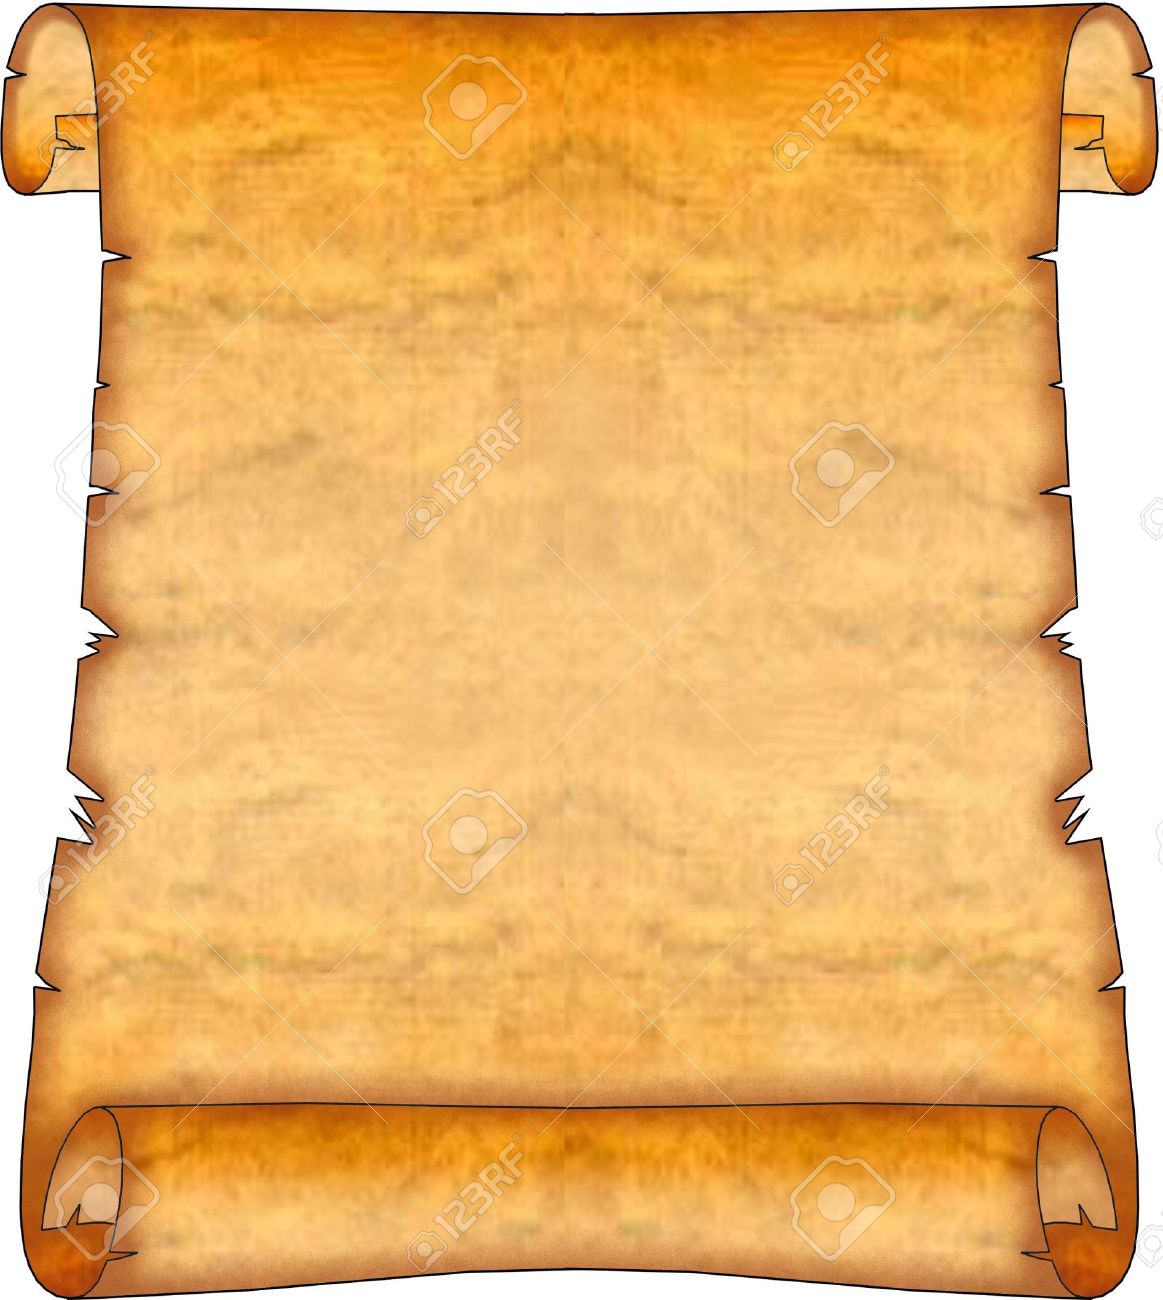 Free Borders Scroll Images 2 Image Png Clipart